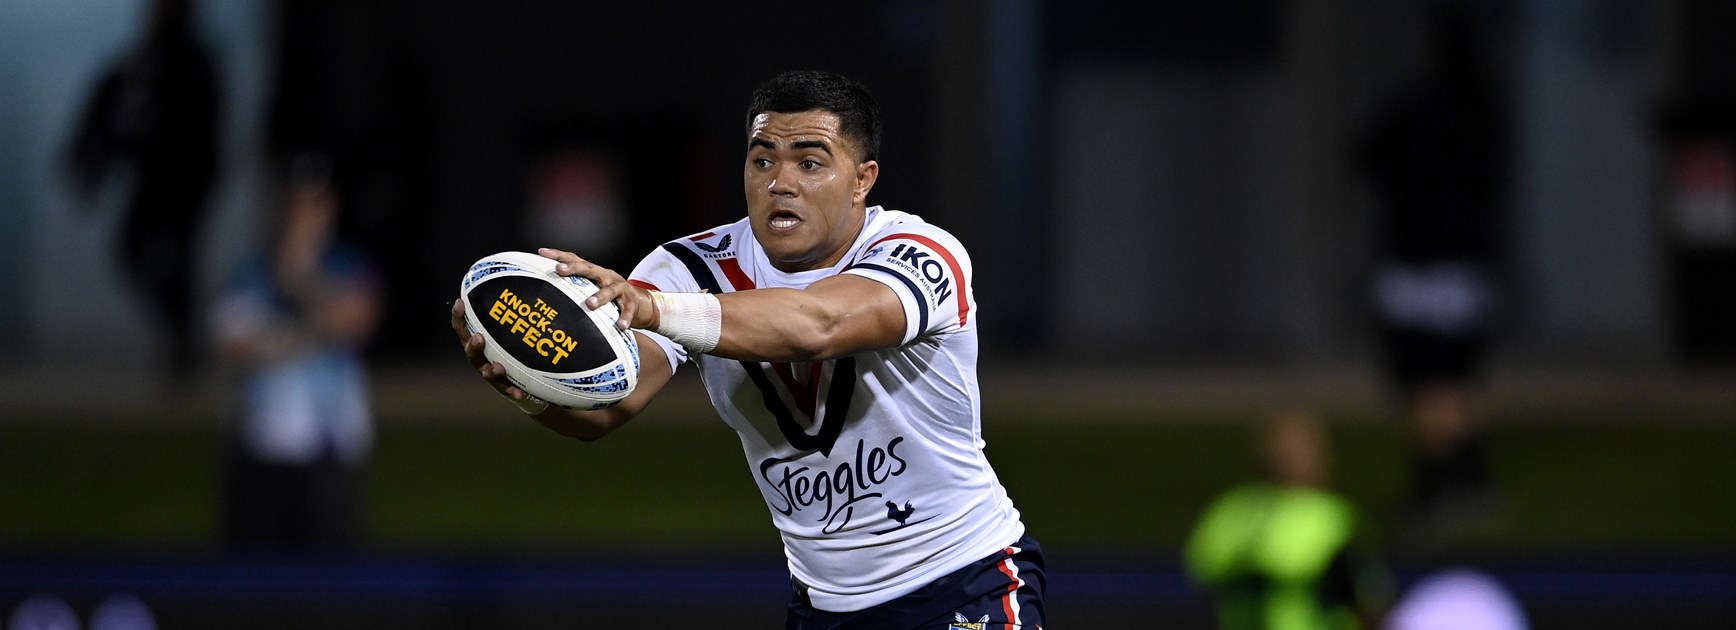 Roosters Hold On for Hard-Fought Win